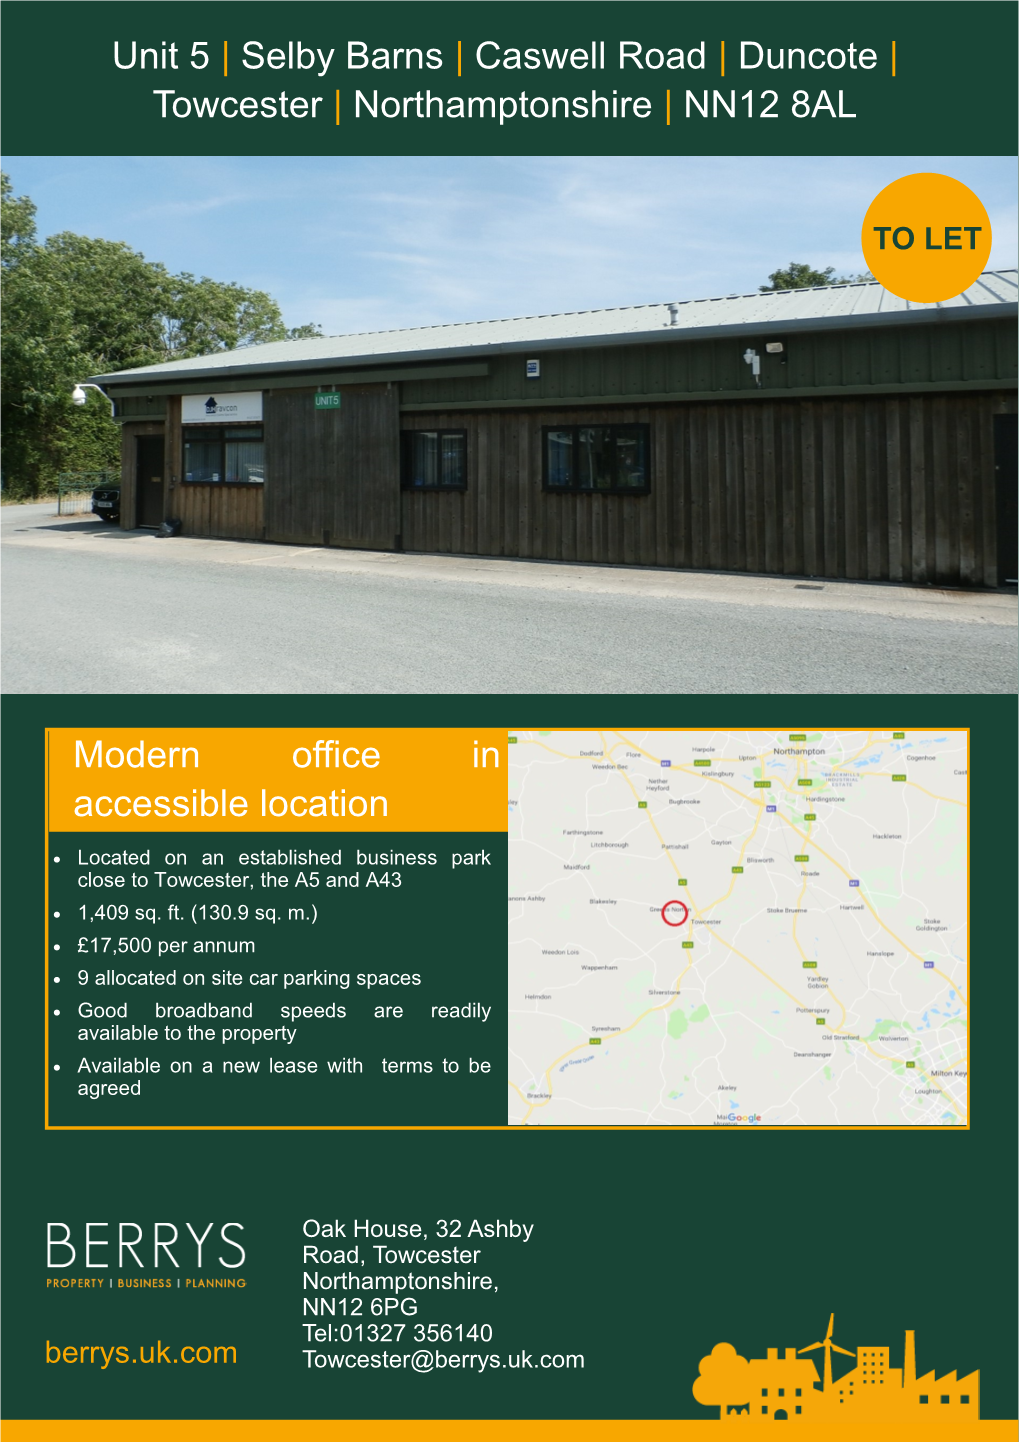 Selby Barns | Caswell Road | Duncote | Towcester | Northamptonshire | NN12 8AL